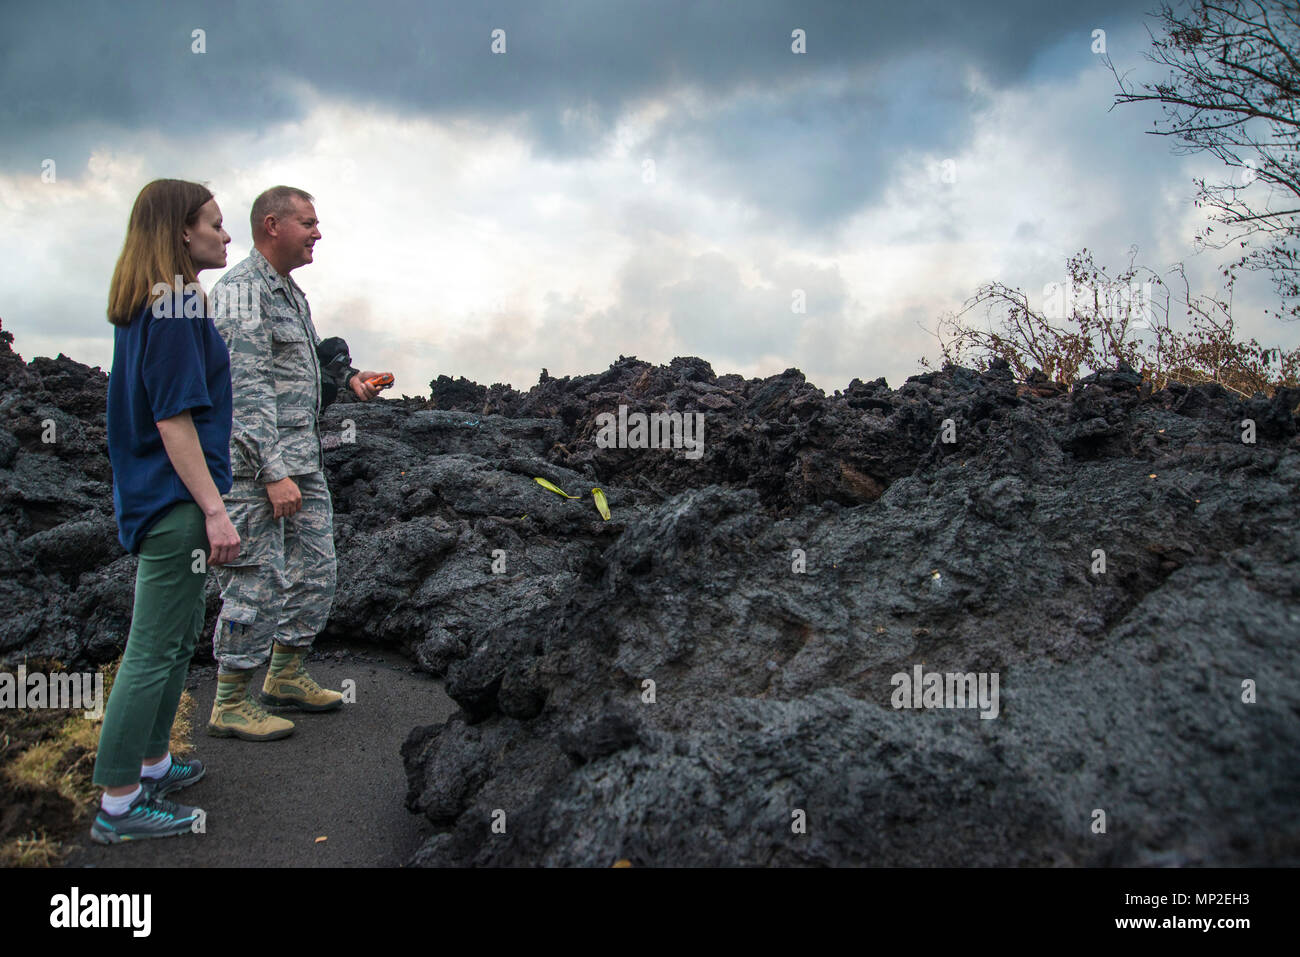 FEMA employee Meghan Breitenbach and U.S. Air Force Lieutenant Colonel Chuck Anthony view a portion of the hardened lava flow spewing from the Kilauea volcanic eruption May 18, 2018 in Pahoa, Hawaii. The recent eruption continues destroying homes, forcing evacuations and spewing lava and poison gas on the Big Island of Hawaii. Stock Photo